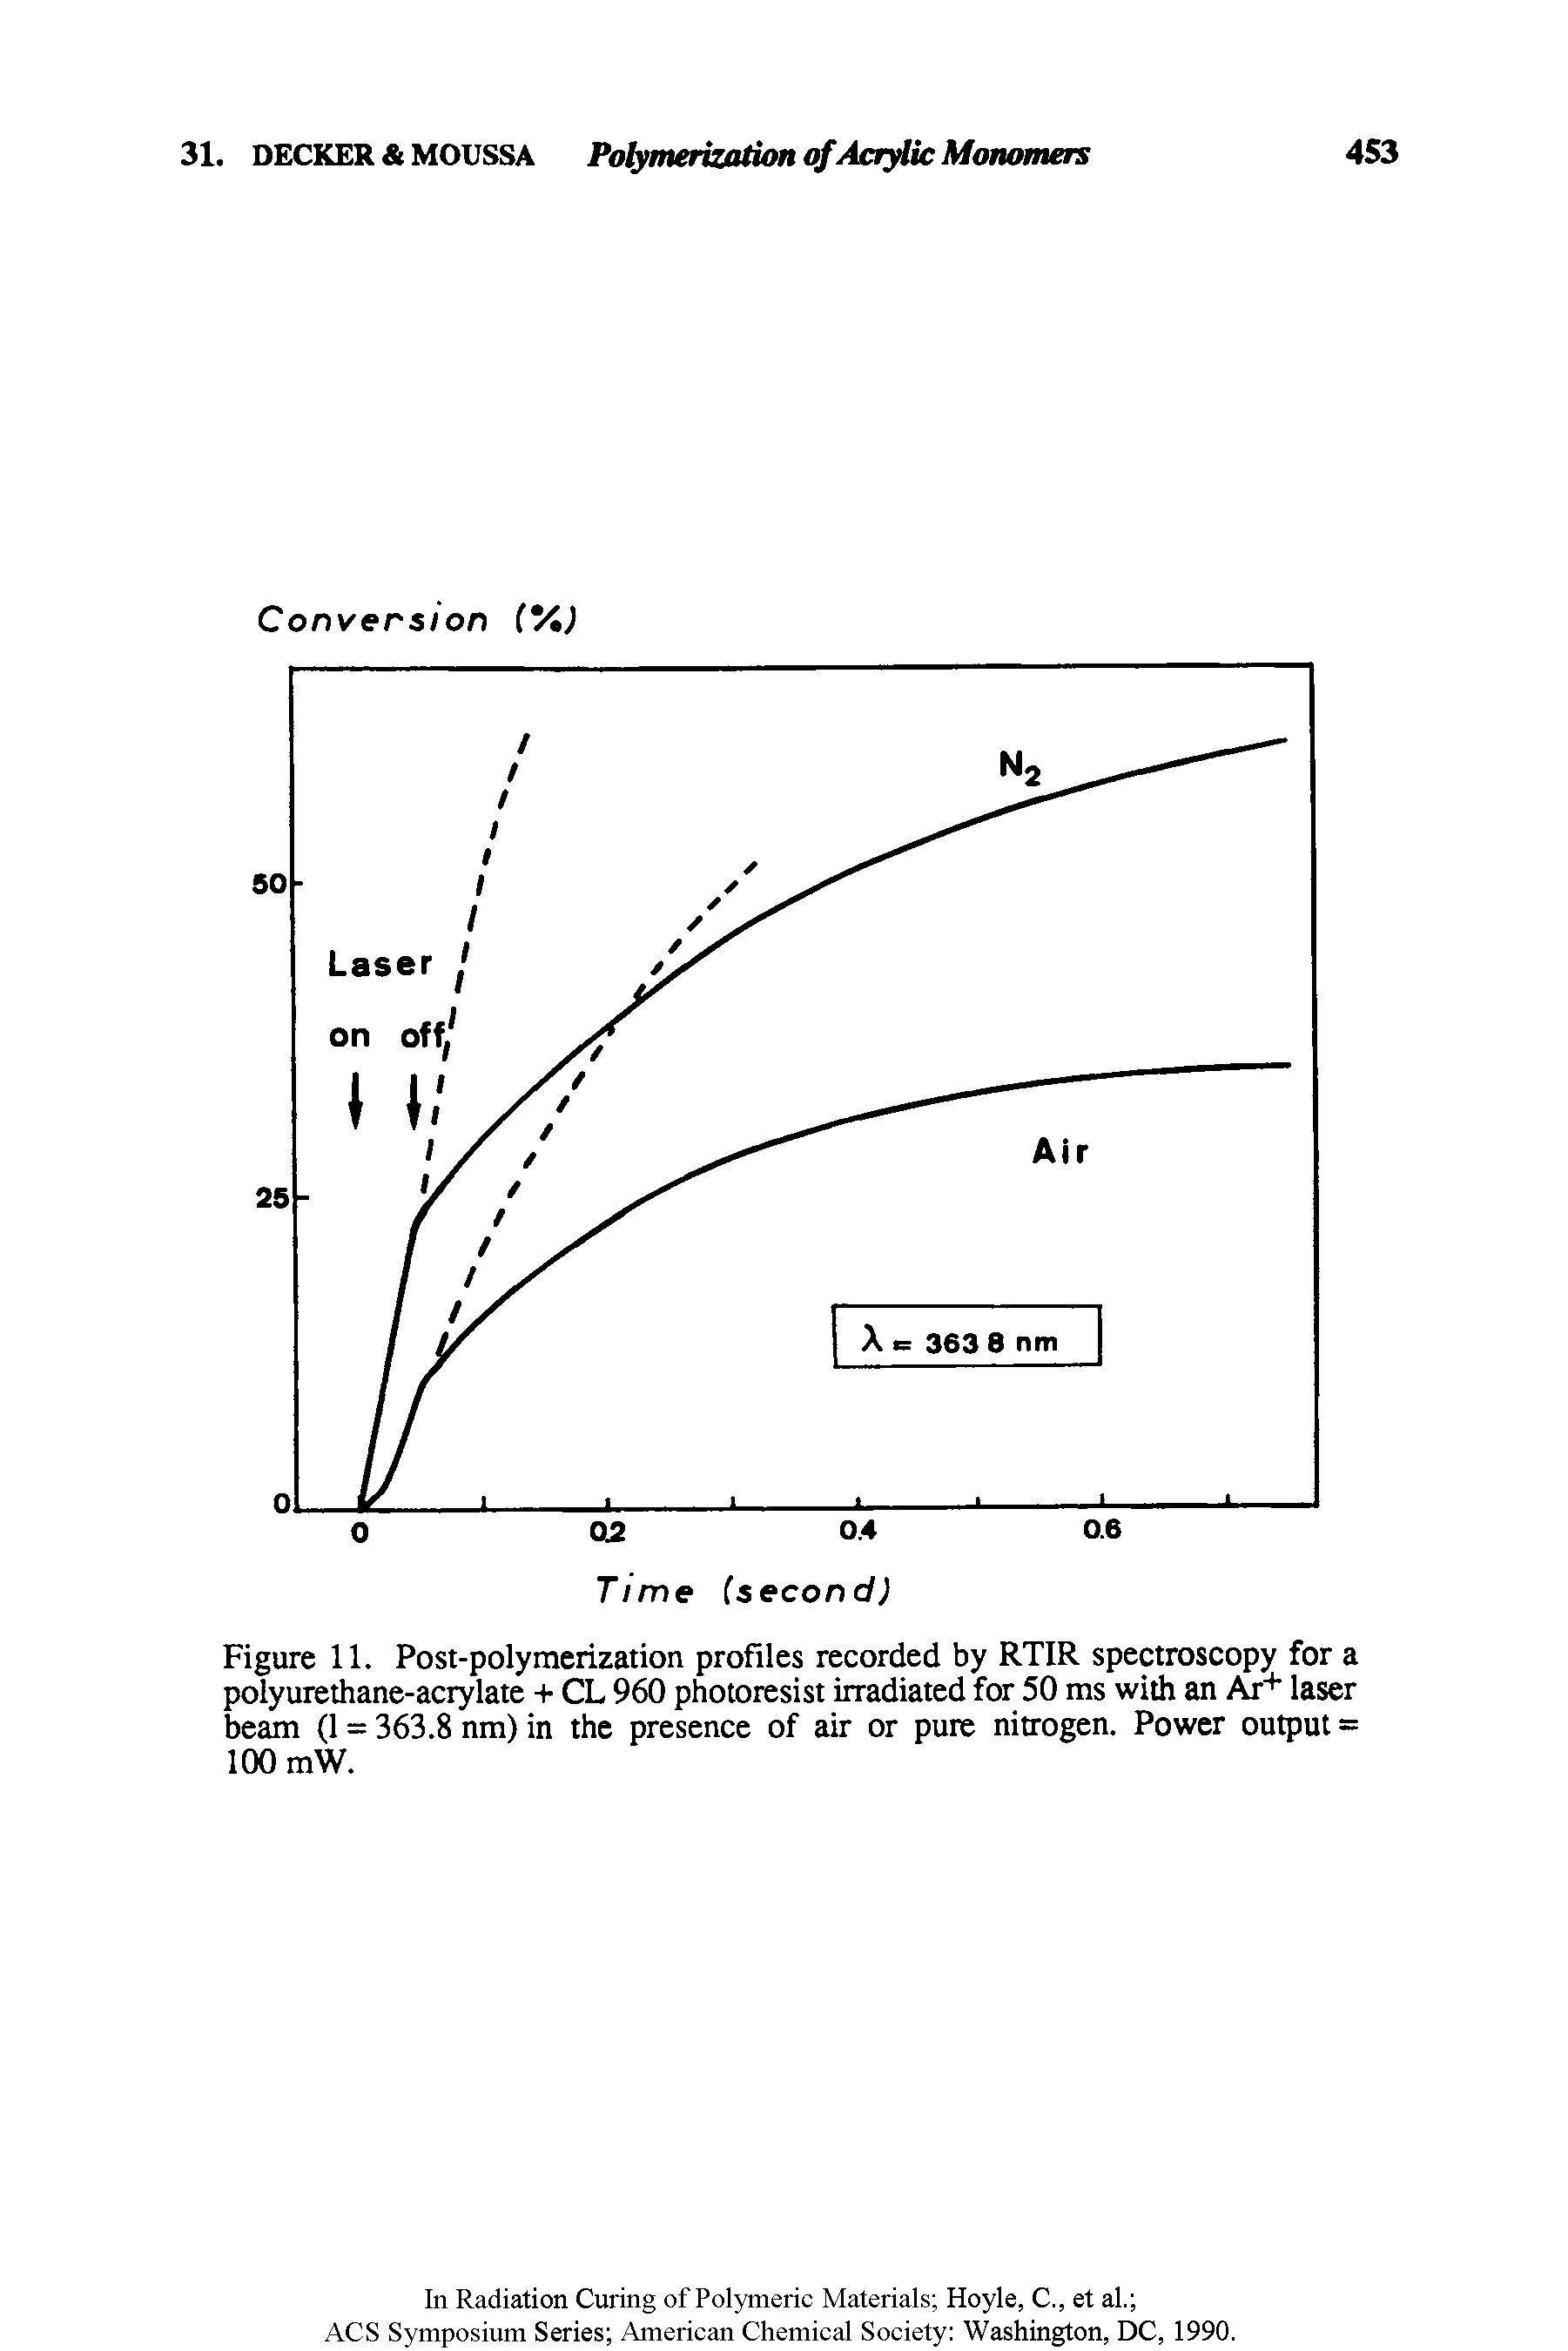 Figure 11. Post-polymerization profiles recorded by RTIR spectroscopy for a polyurethane-acrylate + CL 960 photoresist irradiated for 50 ms with an Ai laser beam (1 = 363.8 nm) in the presence of air or pure nitrogen. Power output = 100 mW.